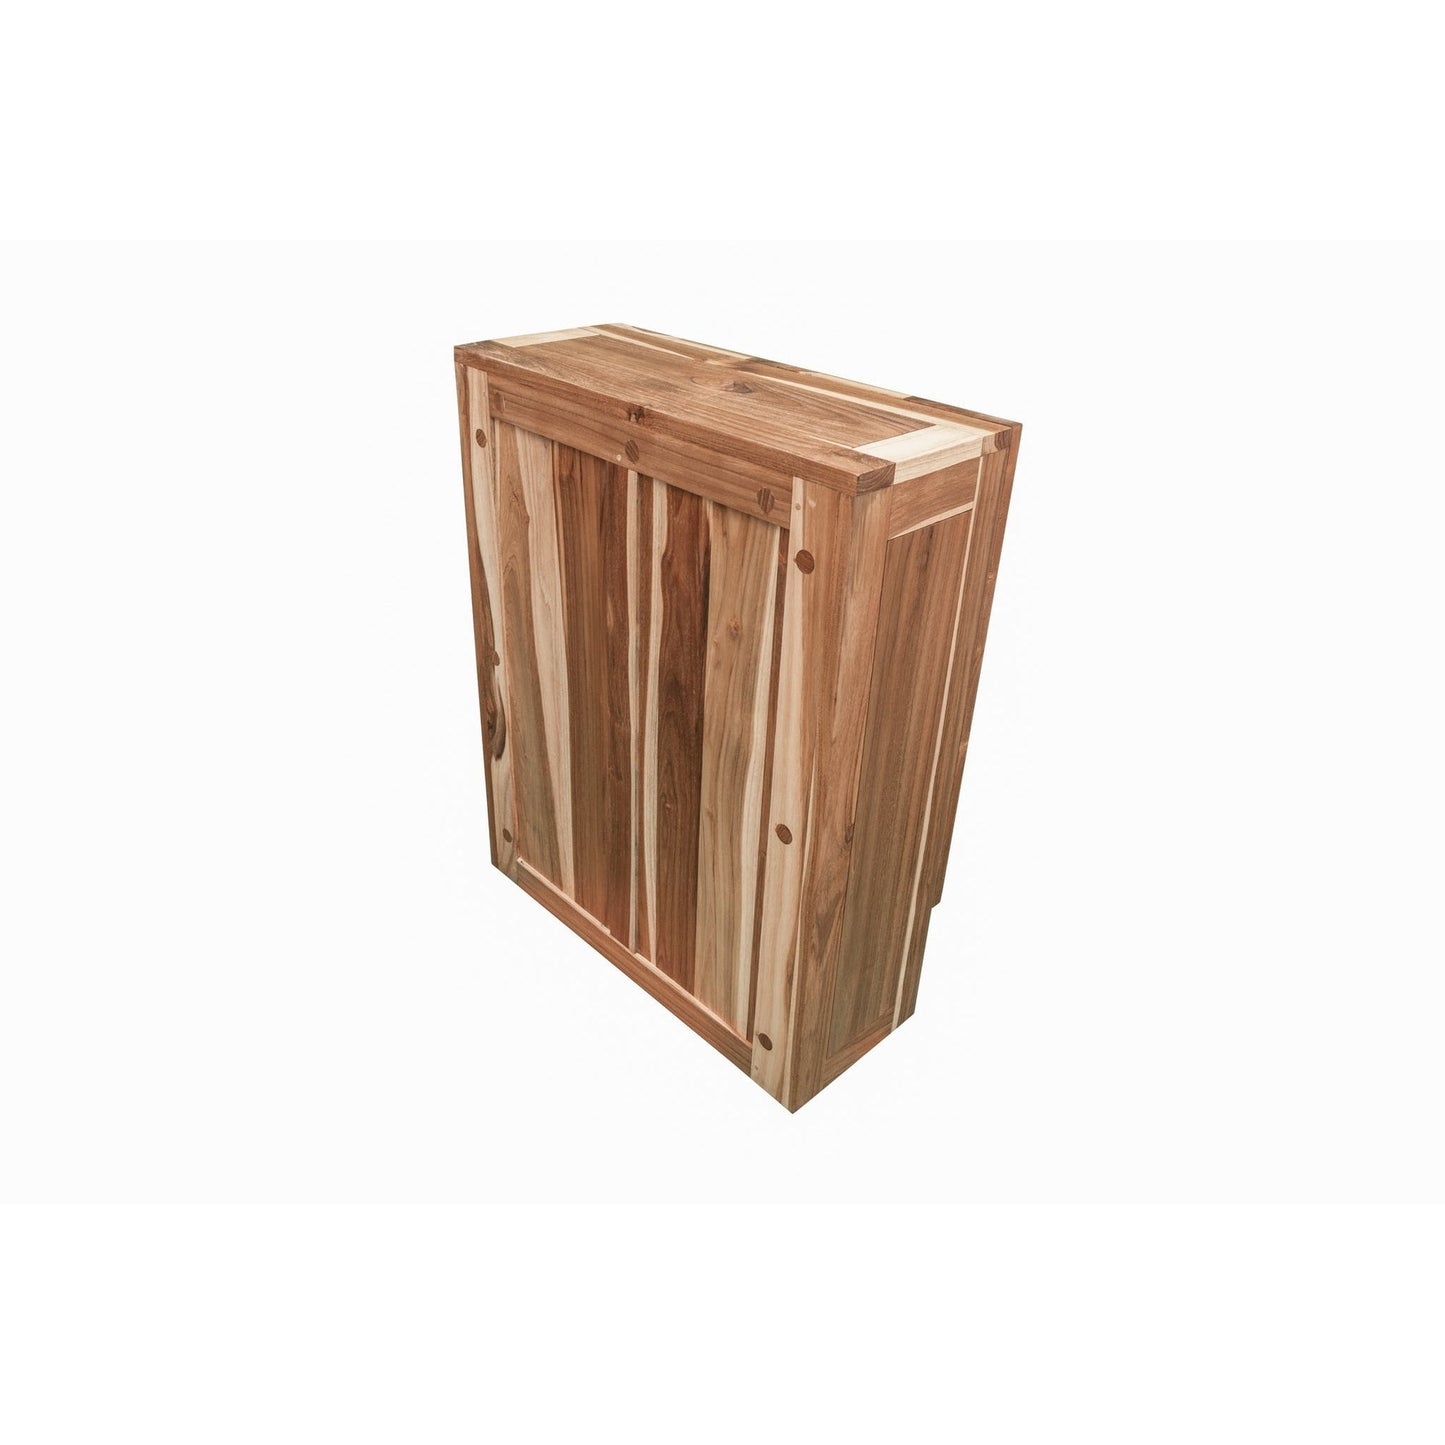 EcoDecors Tranquility 24" EarthyTeak Solid Teak Wood Fully Assembled Wall Cabinet